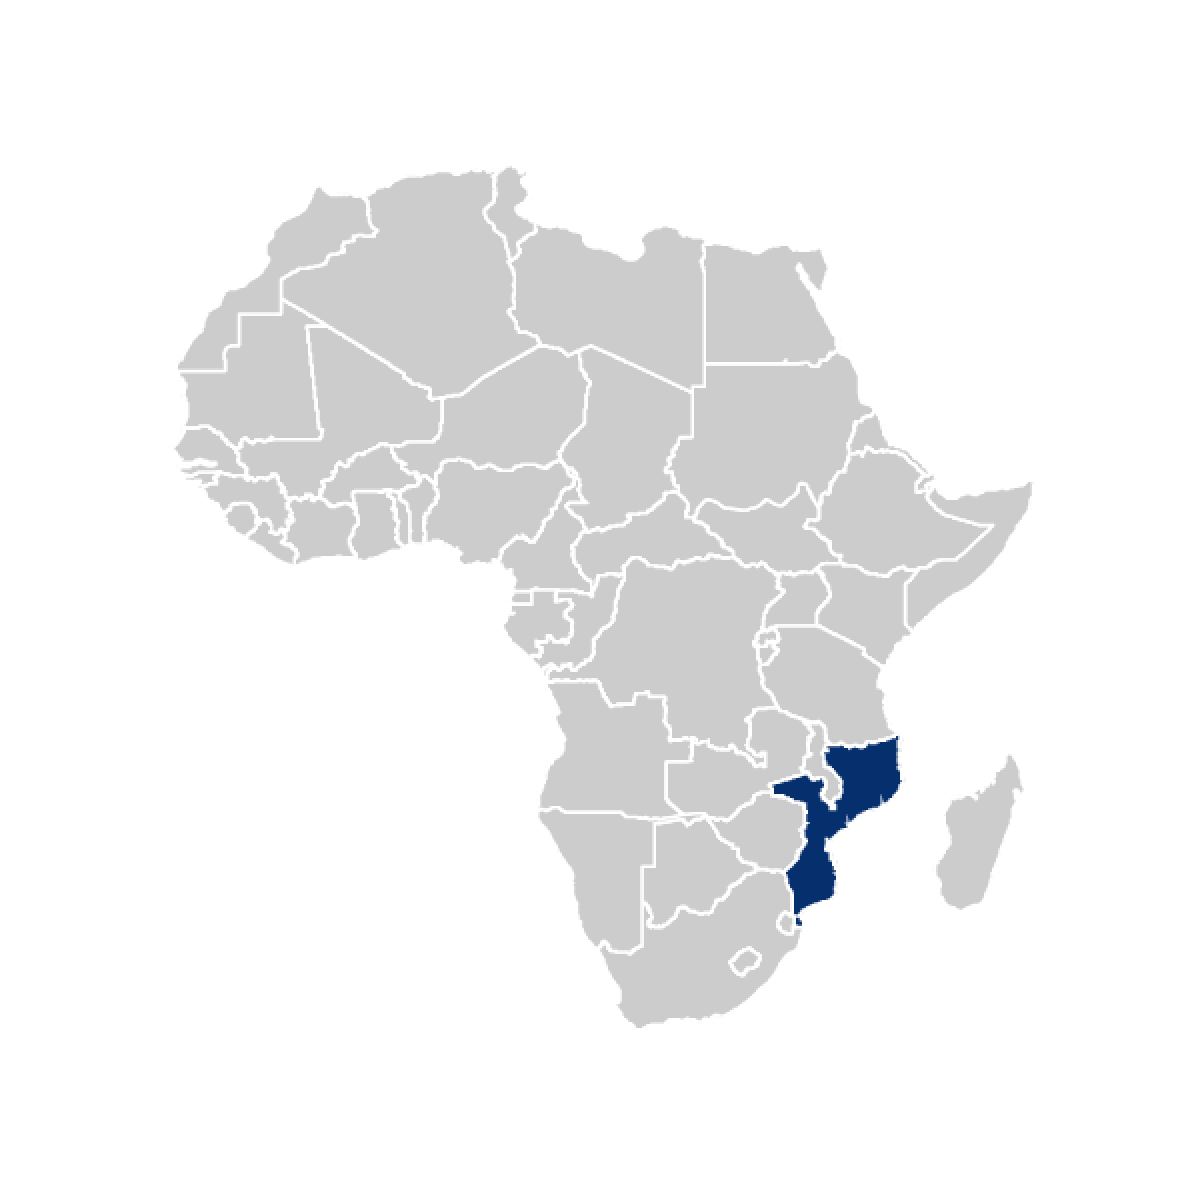 Mozambique highlighted in map of Africa